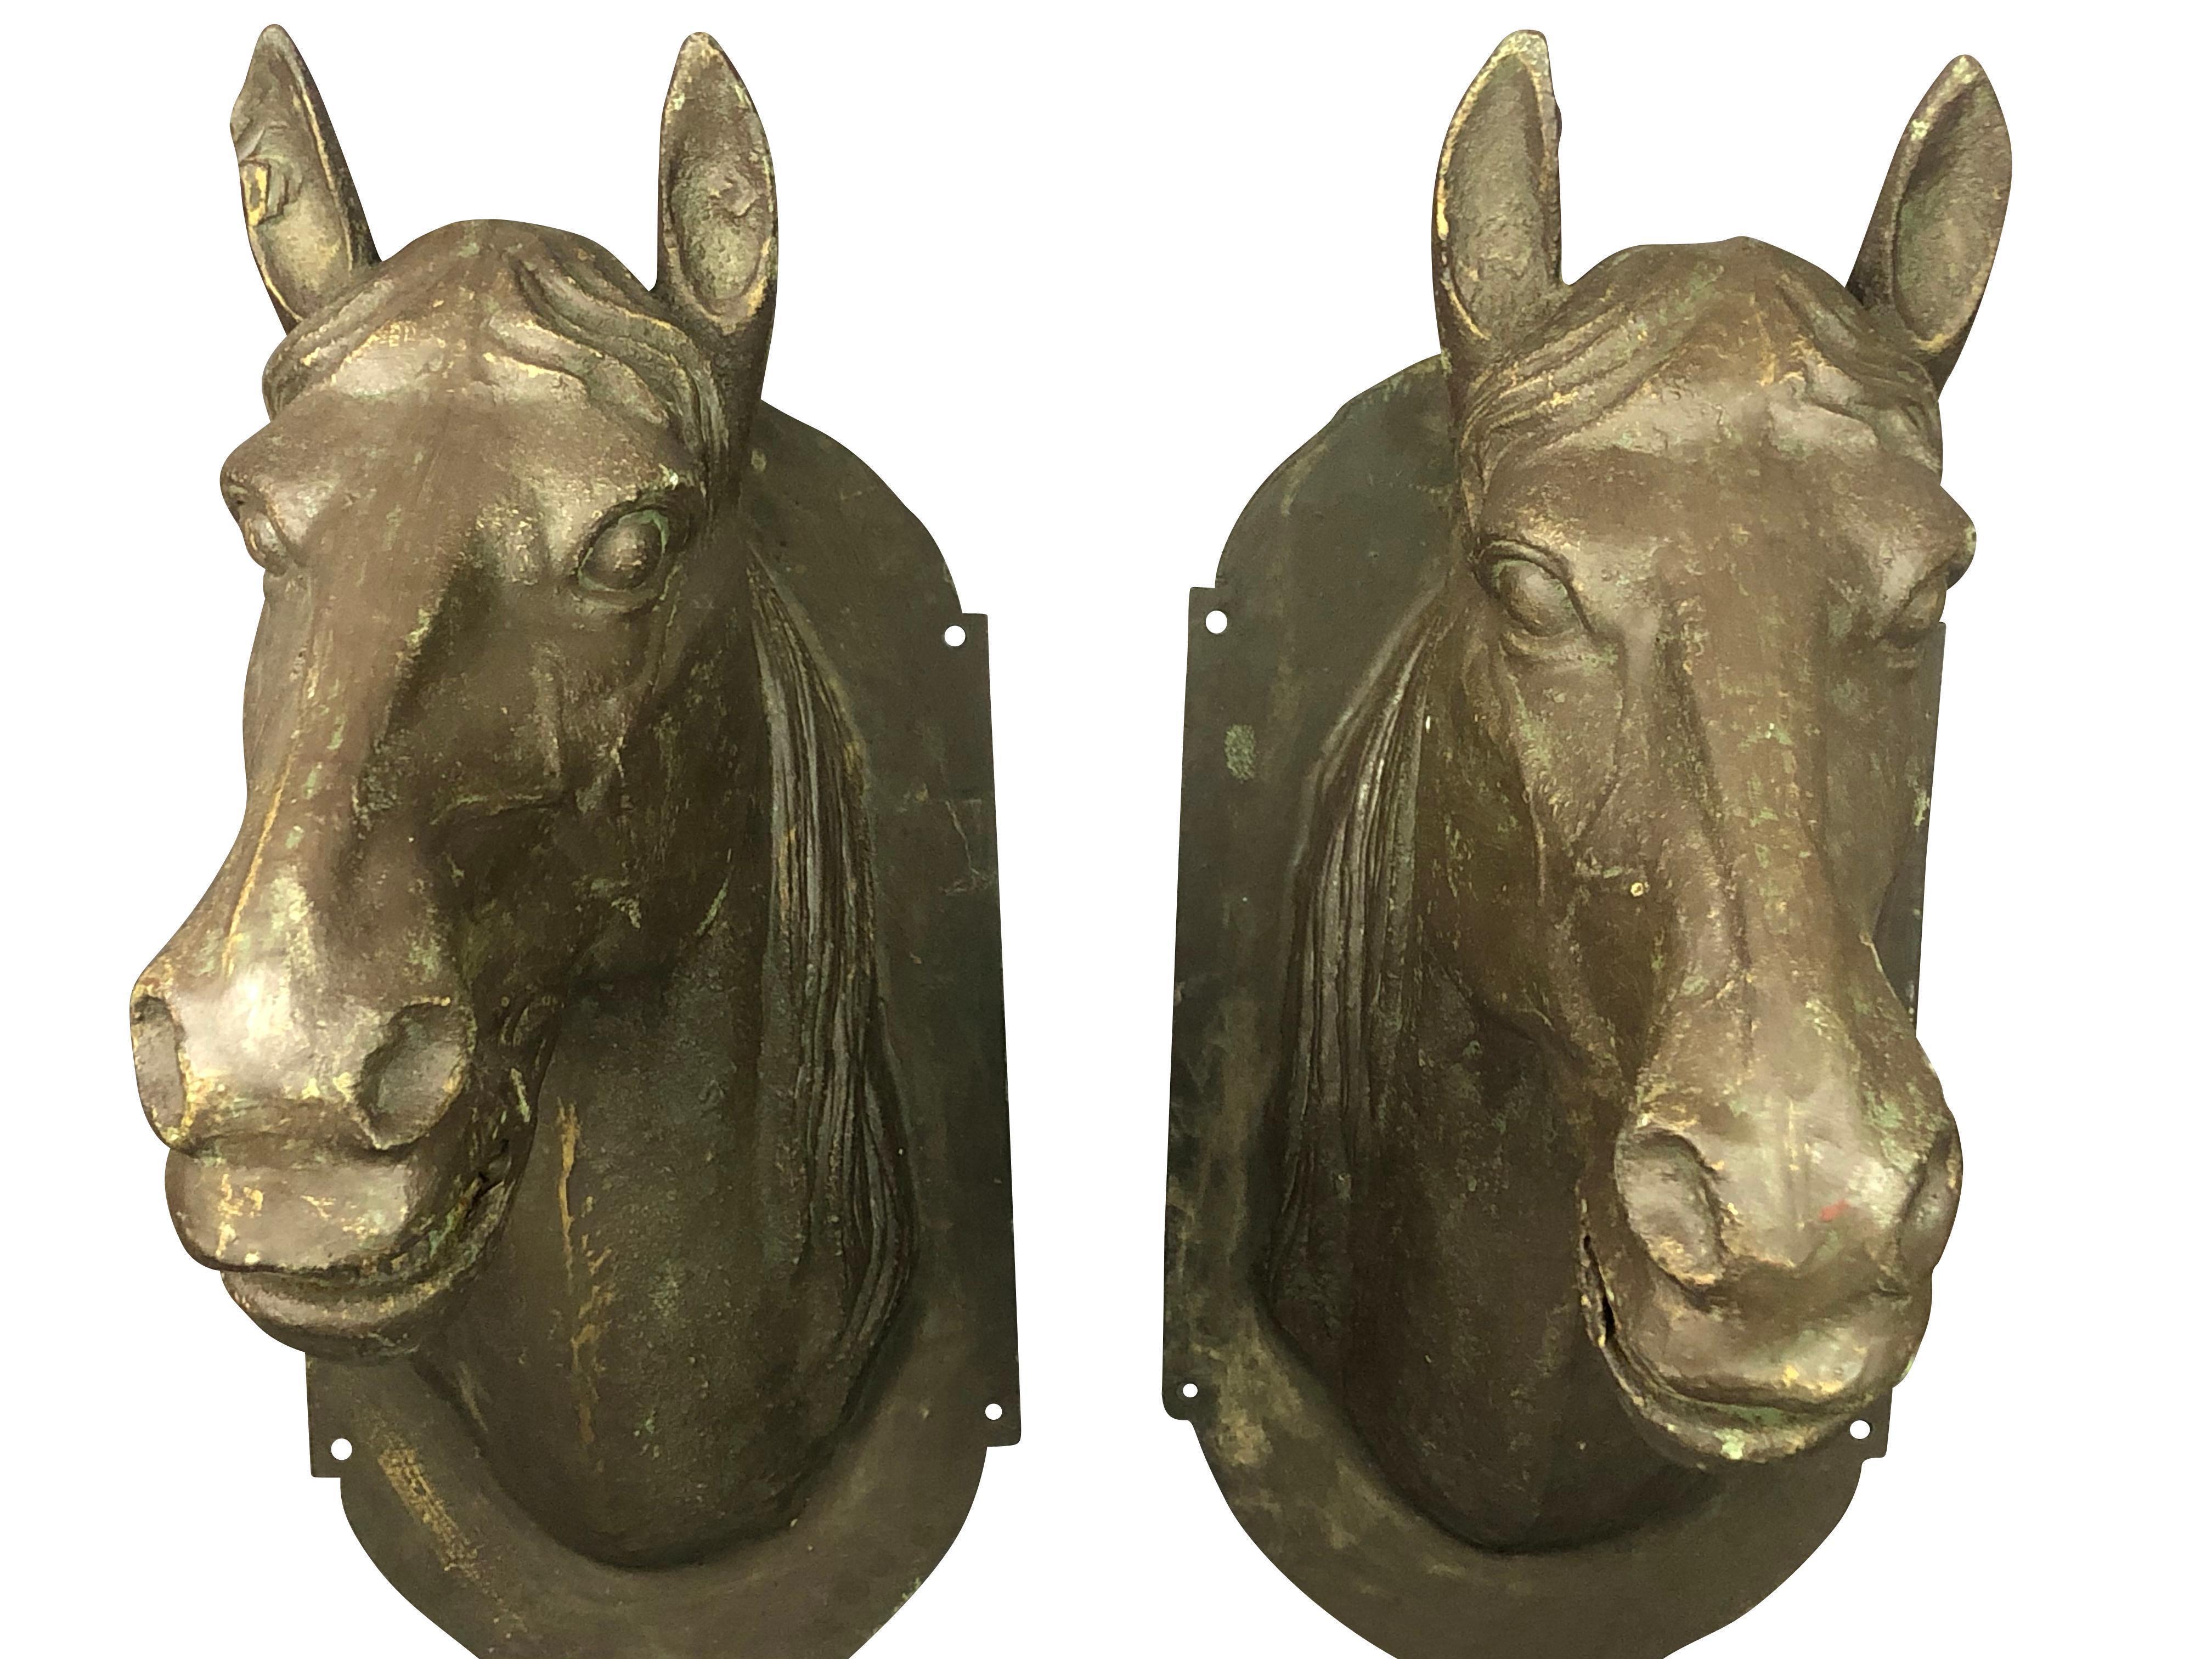 A pair of life-size metal horse heads that are beautifully rendered in mixed metal. Perfect to adorn a barn or doorway. Their coloration is a dark grey with a gold cast in strong daylight. Very realistic.